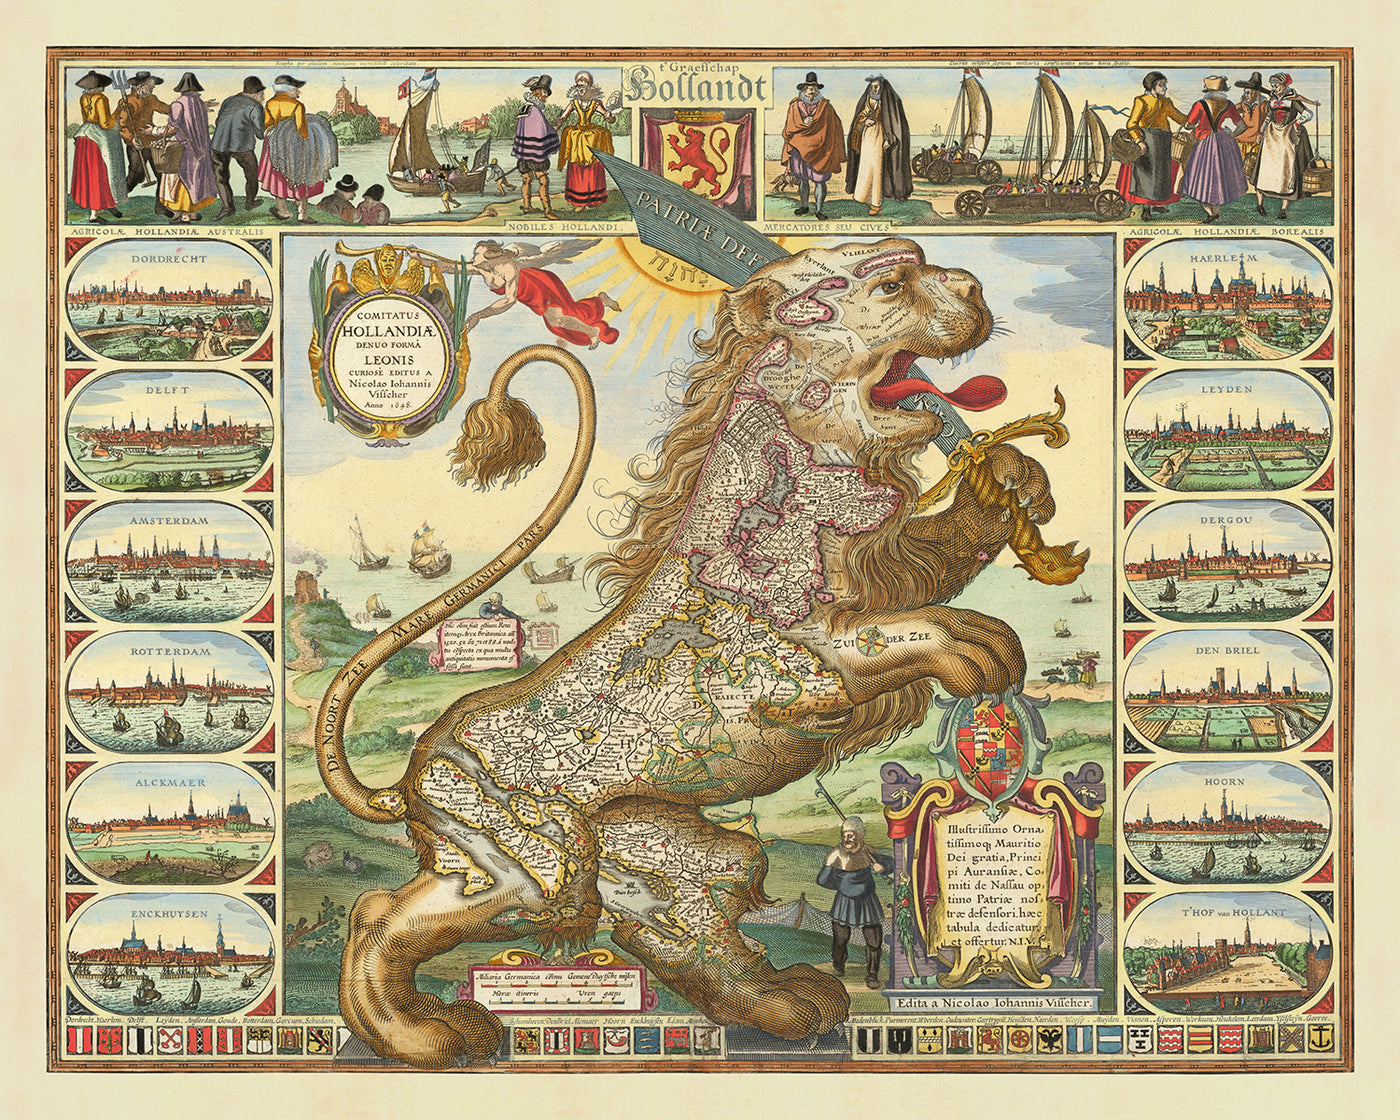 Old Map of Leo Belgicus (Low Countries Lion) by Visscher, 1648: Amsterdam, Rotterdam, Antwerp, Brussels, Ghent